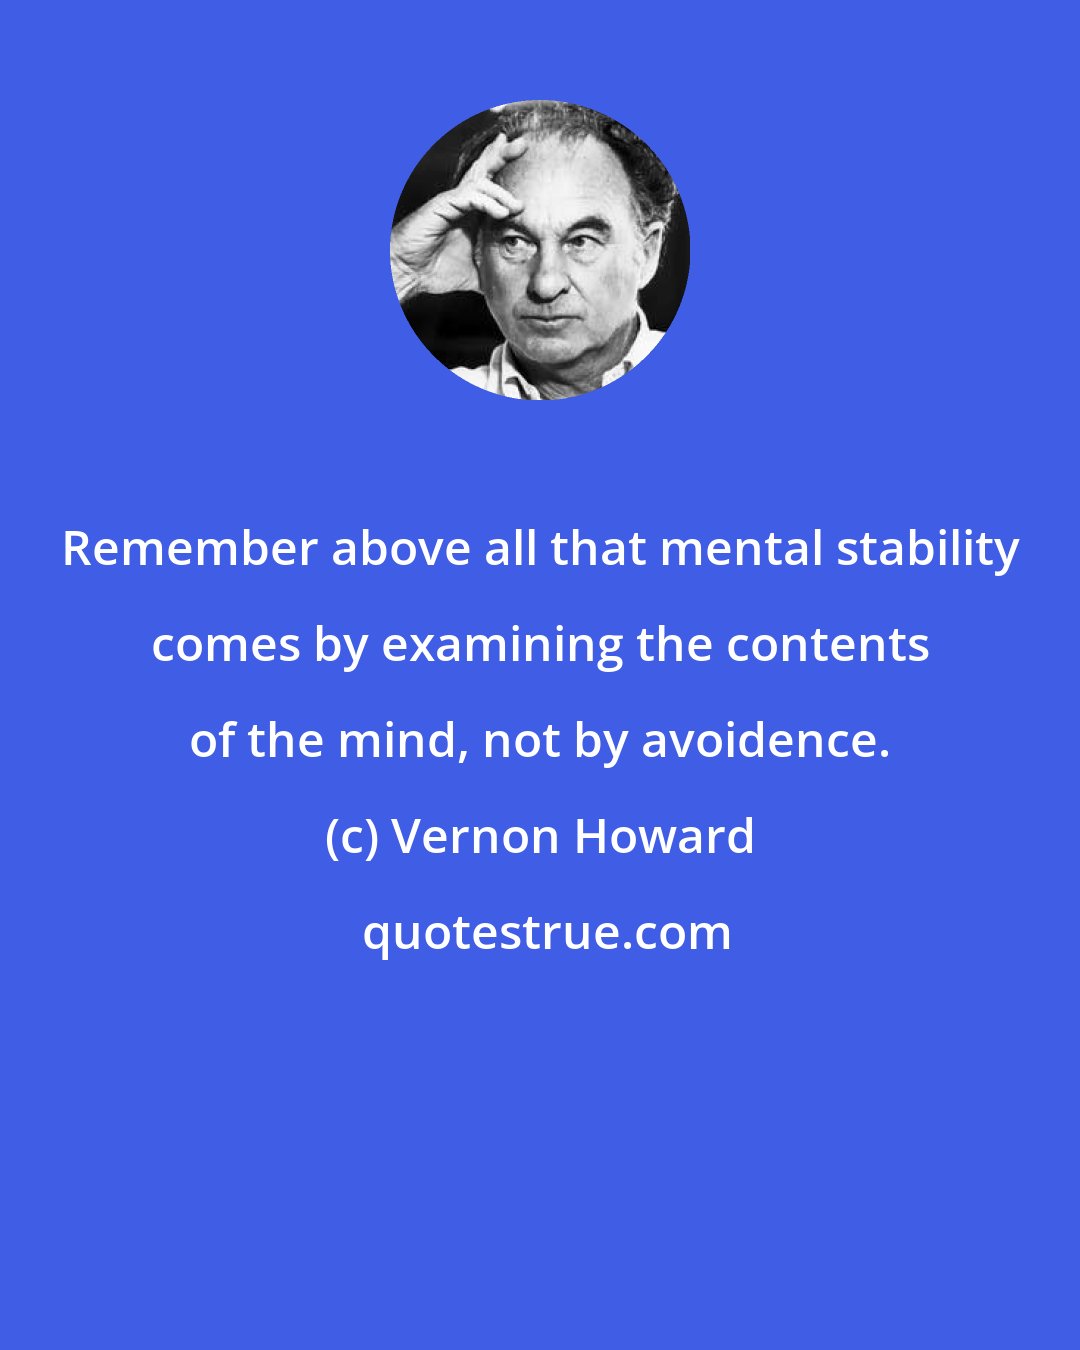 Vernon Howard: Remember above all that mental stability comes by examining the contents of the mind, not by avoidence.